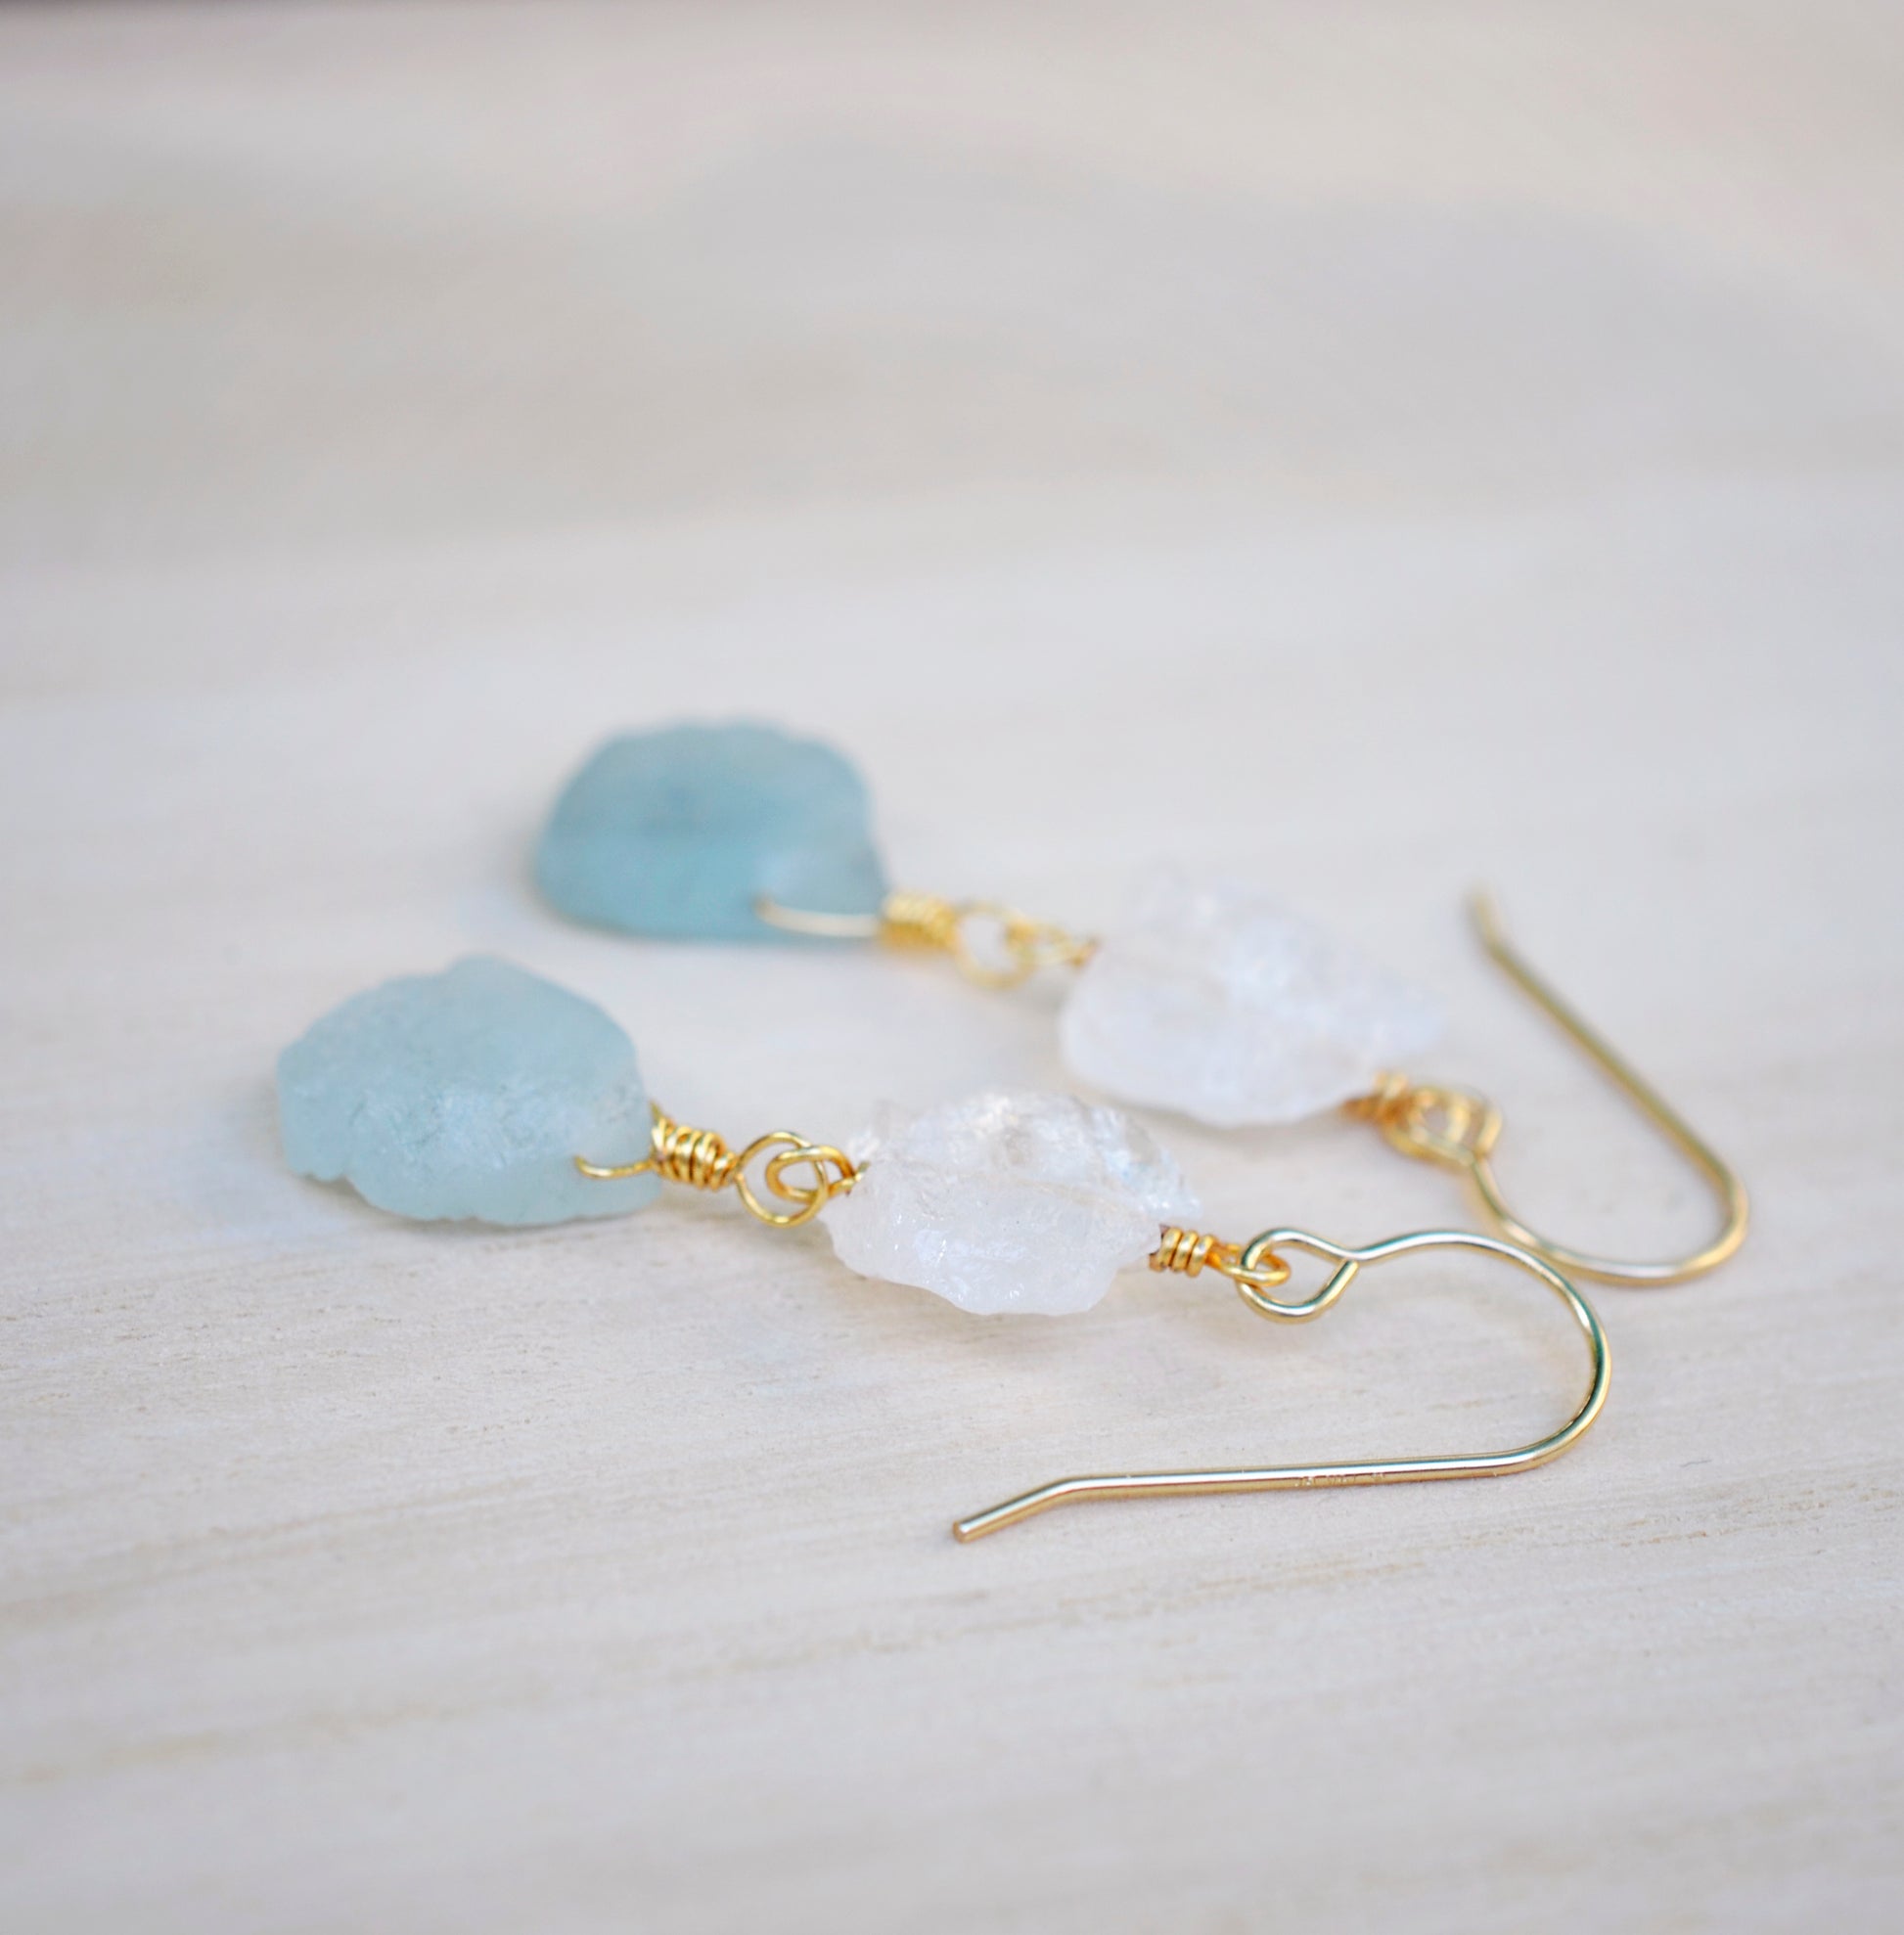 Aquamarine and Crystal Quartz Earrings, 14k Gold Filled or Sterling Silver, Natural Gemstone Dangles, March Birthstone, Crystal Drops, Raw Stone Earrings